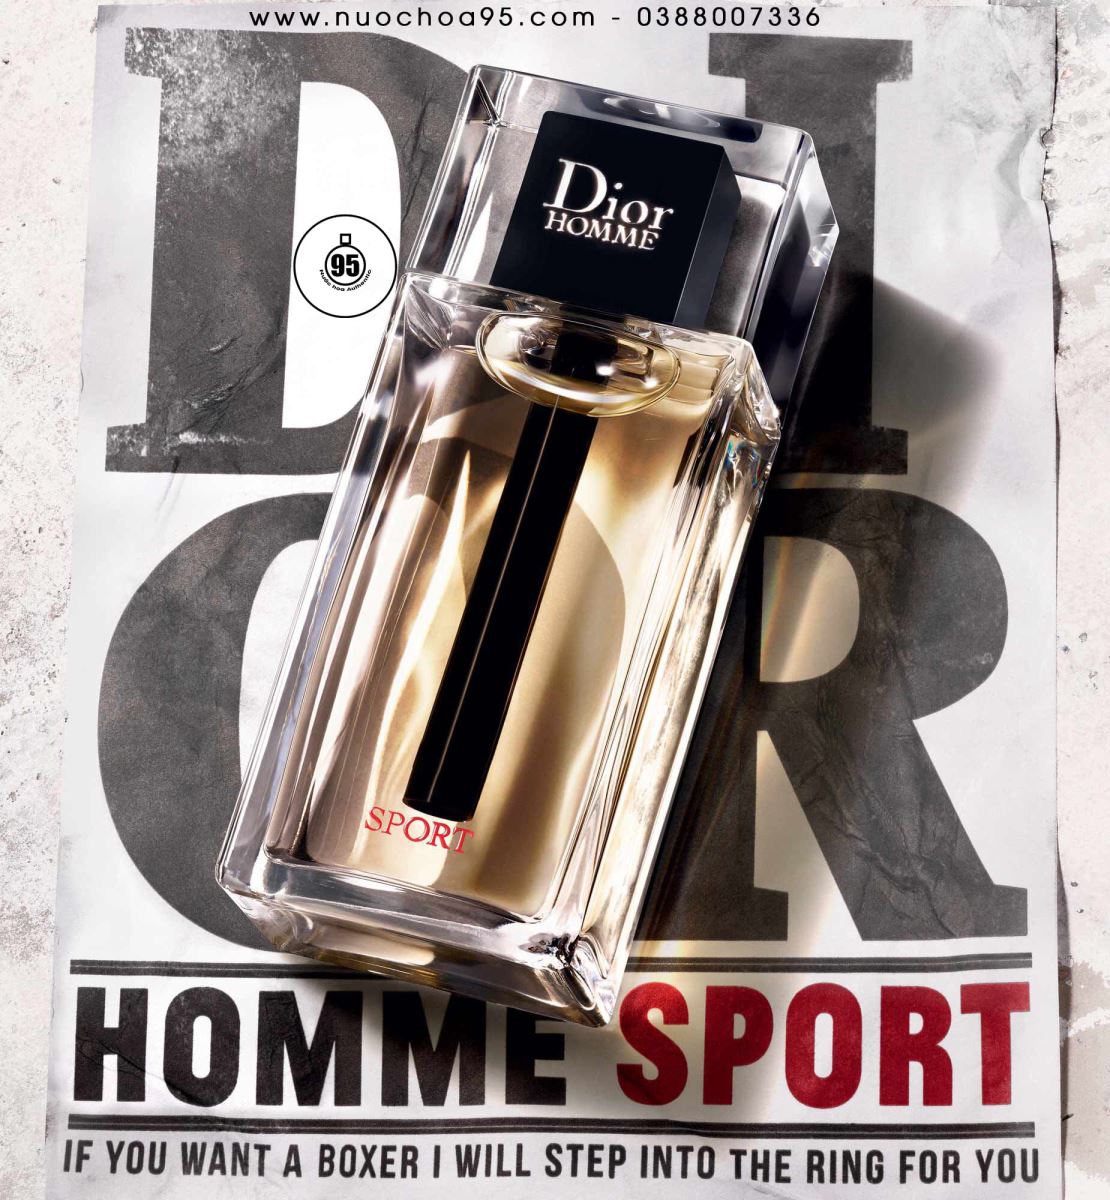 Dior Homme Sport 20212022 REVIEW Another MustBuy Dior Fragrance For Men   YouTube